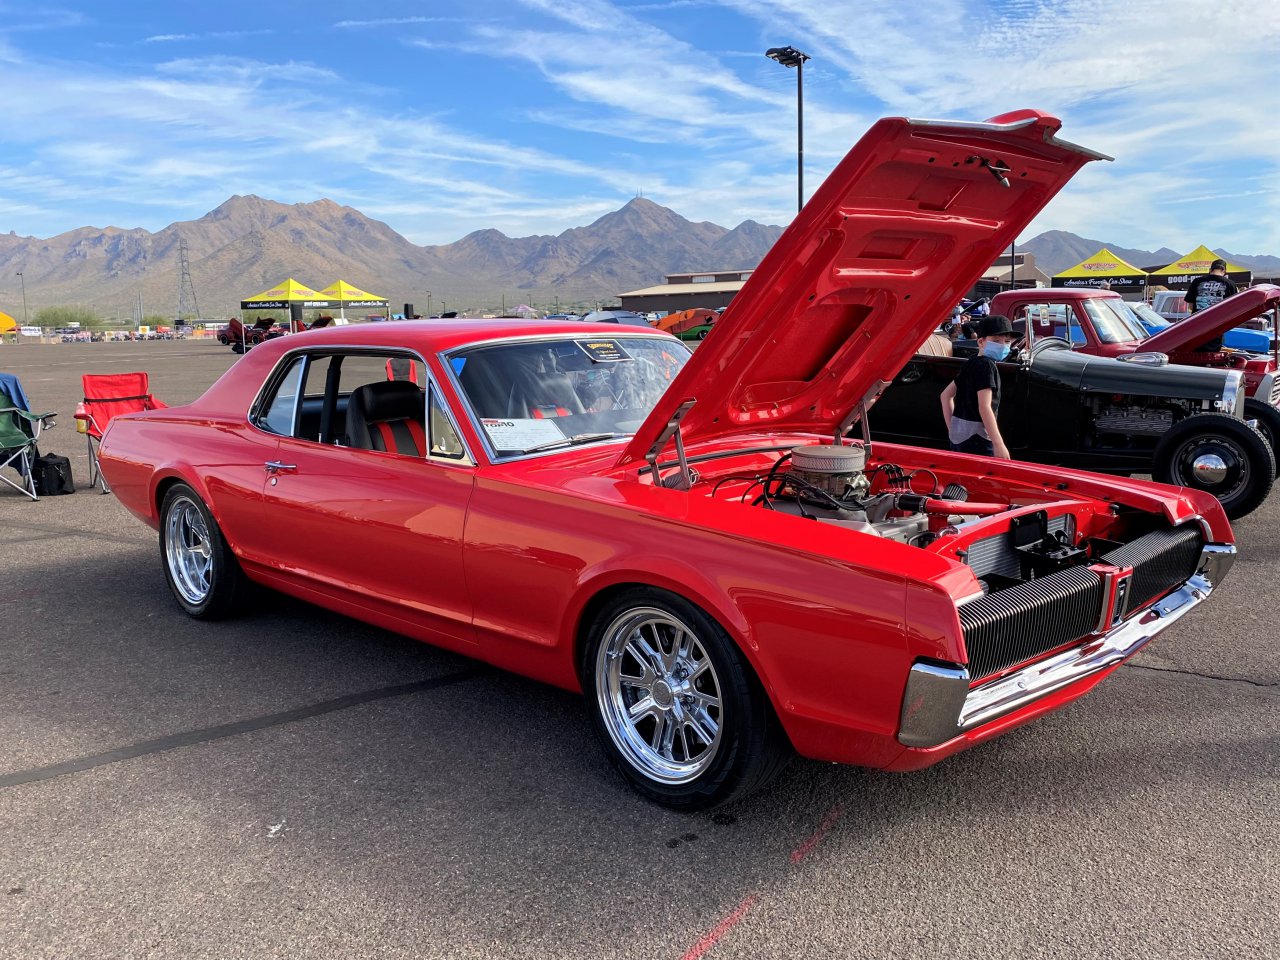 Goodguys, Goodguys cars of the year featured at Southwest Nationals, ClassicCars.com Journal